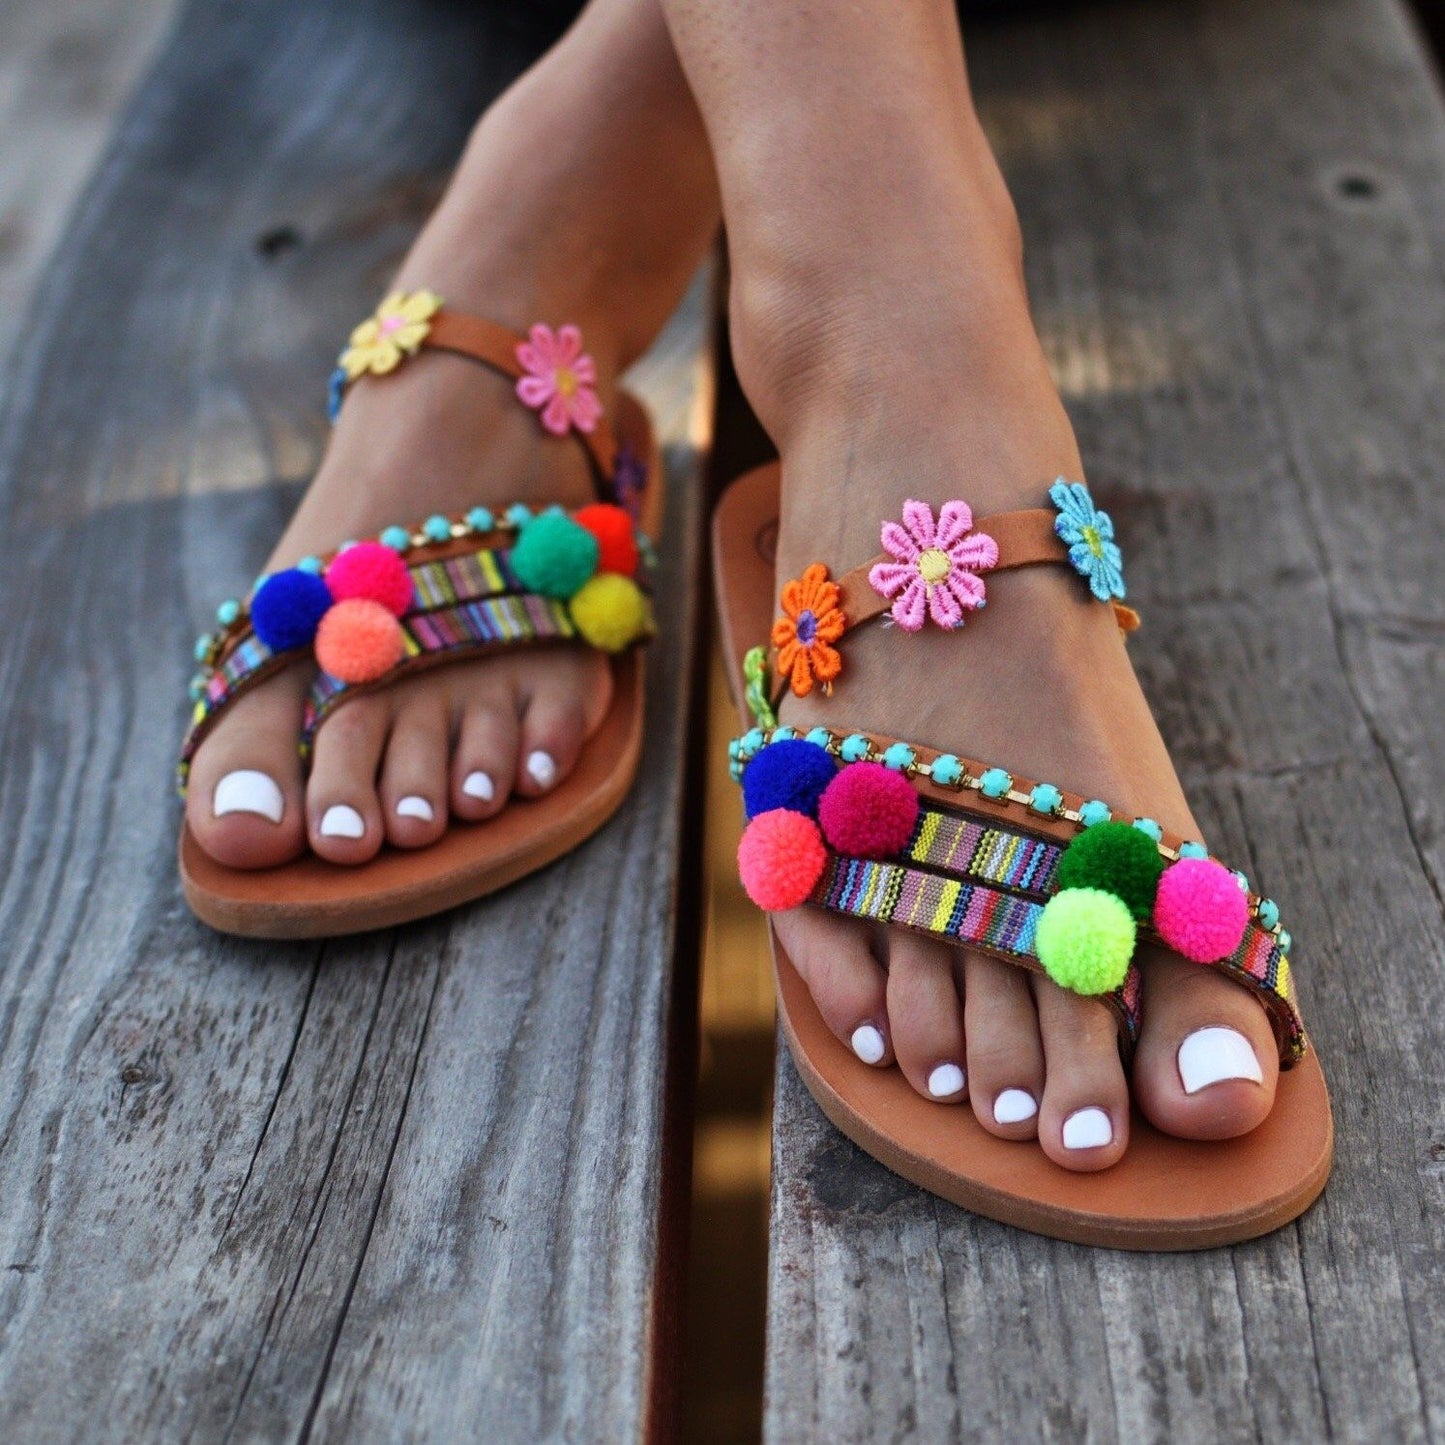 sandals made in greece